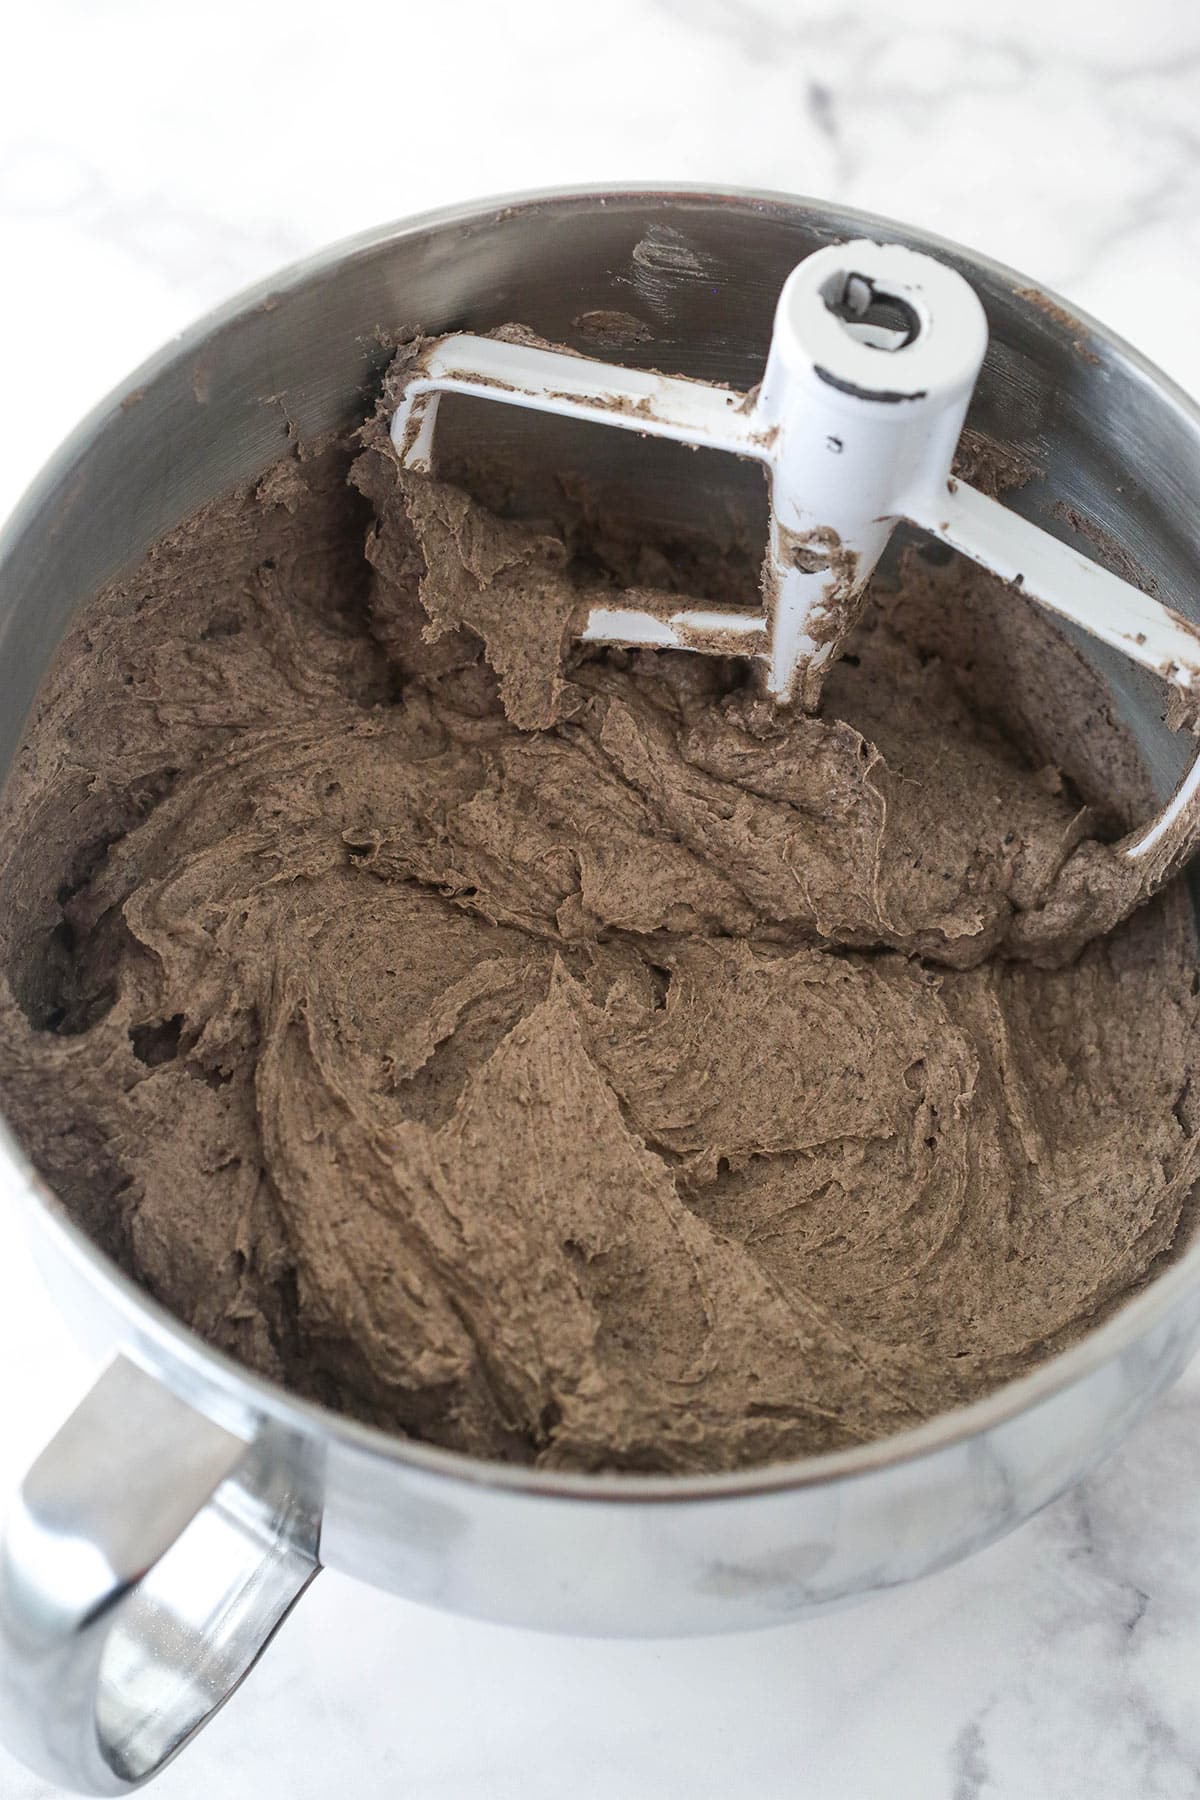 Mixing Oreo buttercream frosting.